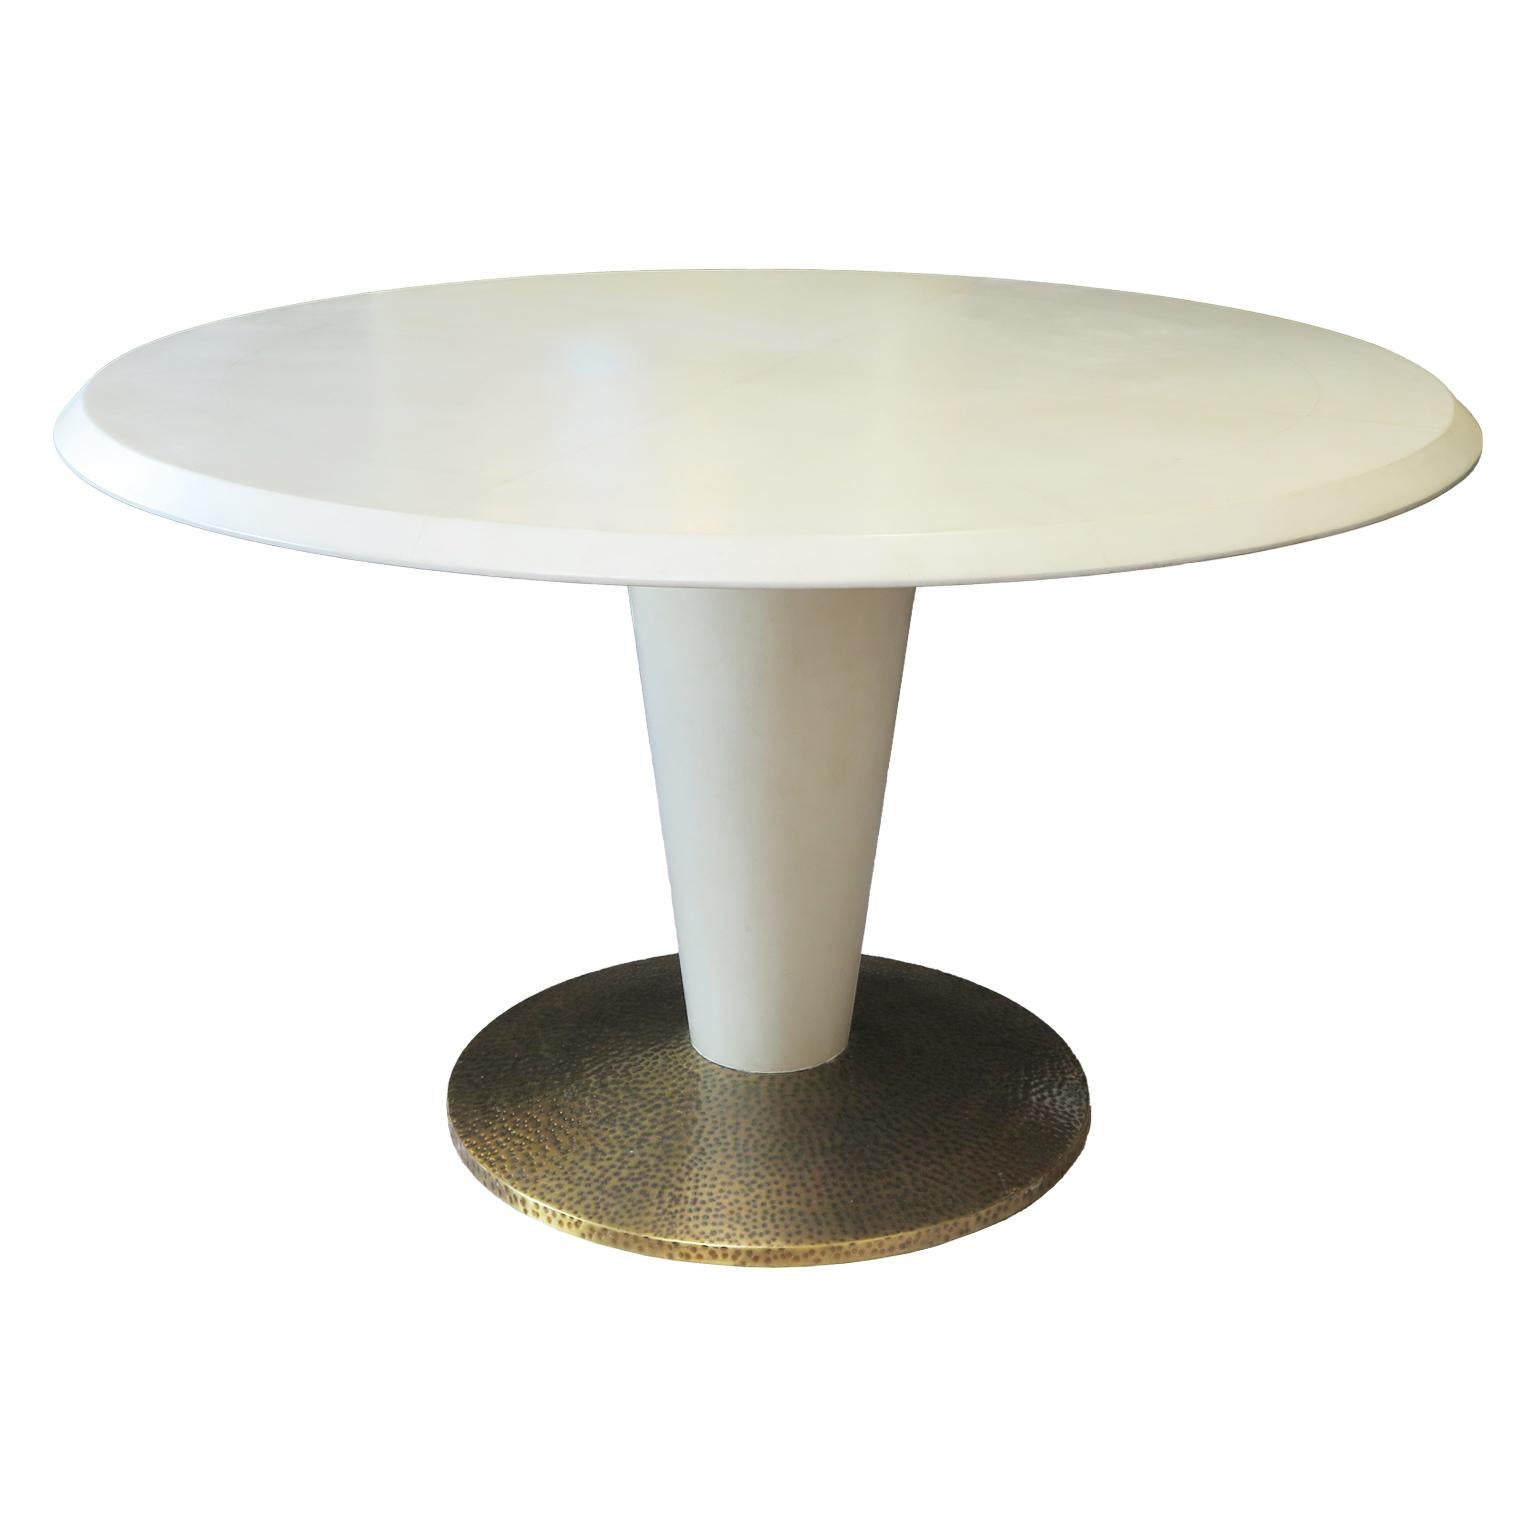 This Italian Mid-Century table is done in a faux Parchment look with a hand applied lacquer technique. The top is divided into four sections with an ivory, slightly aged yellow tint evoking the feel of parchment. The table showcases a tapered stem